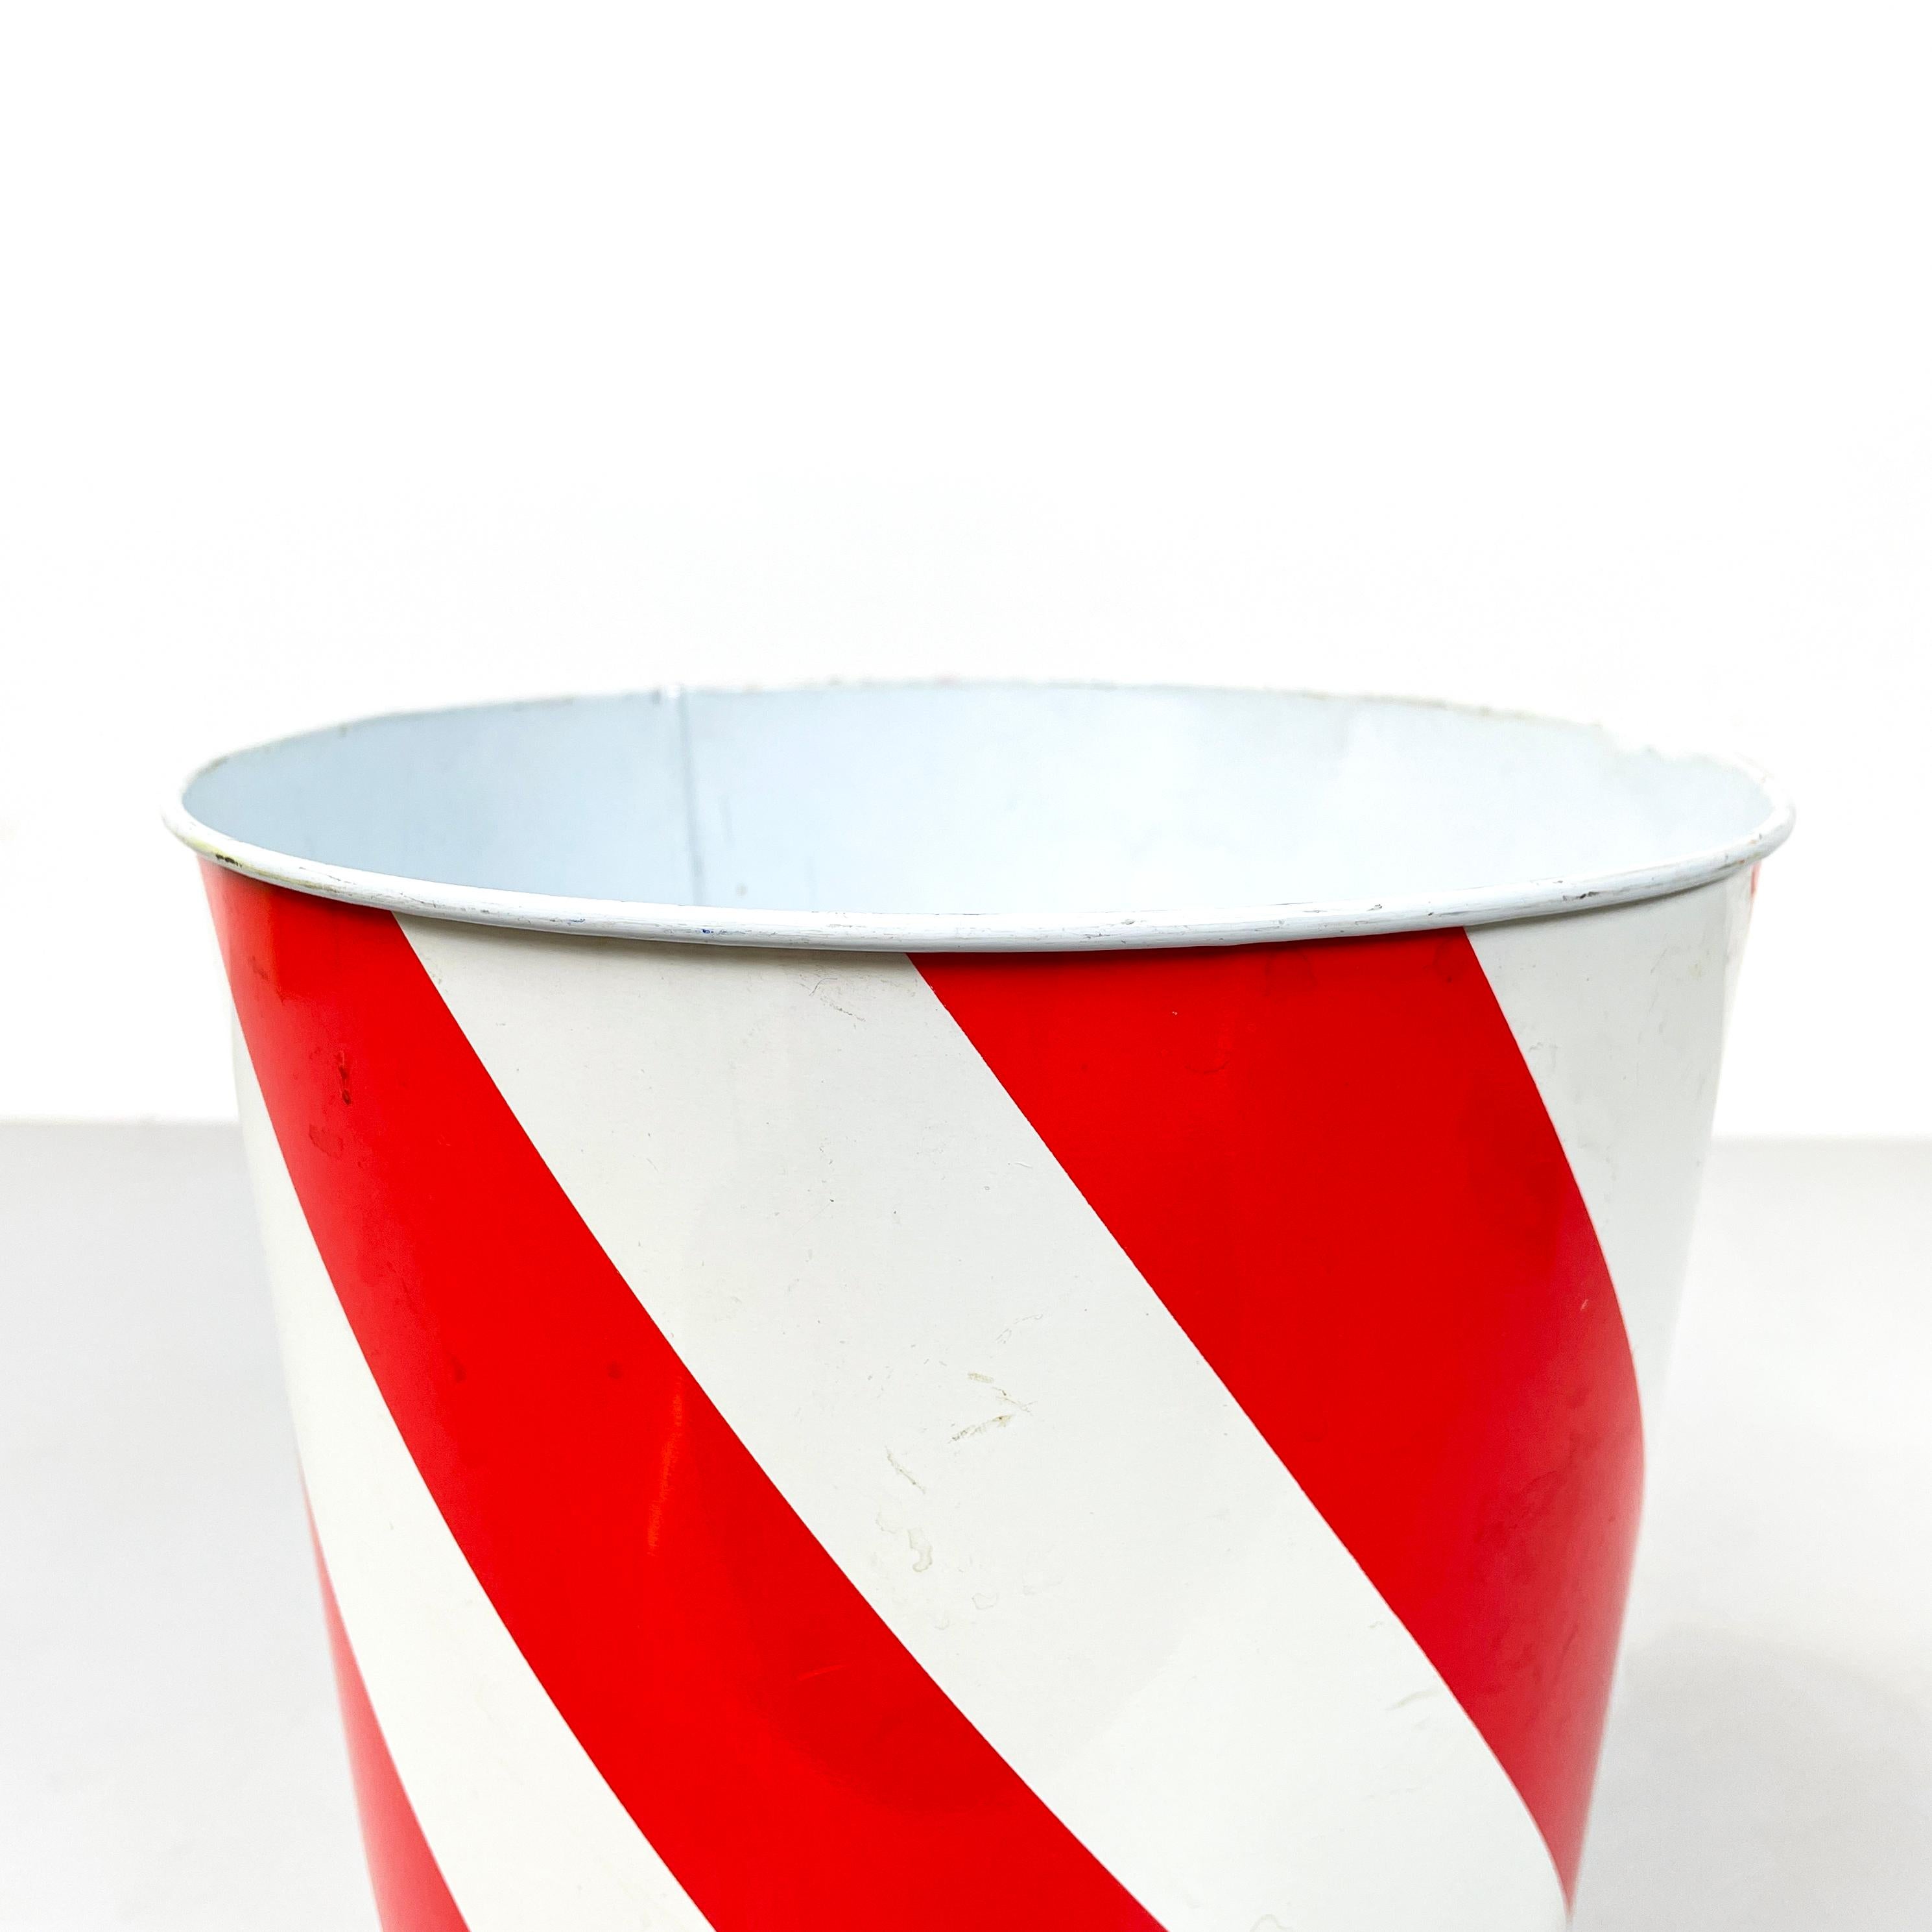 English England modern Round wastepaper basket in red and white metal, 1990s For Sale